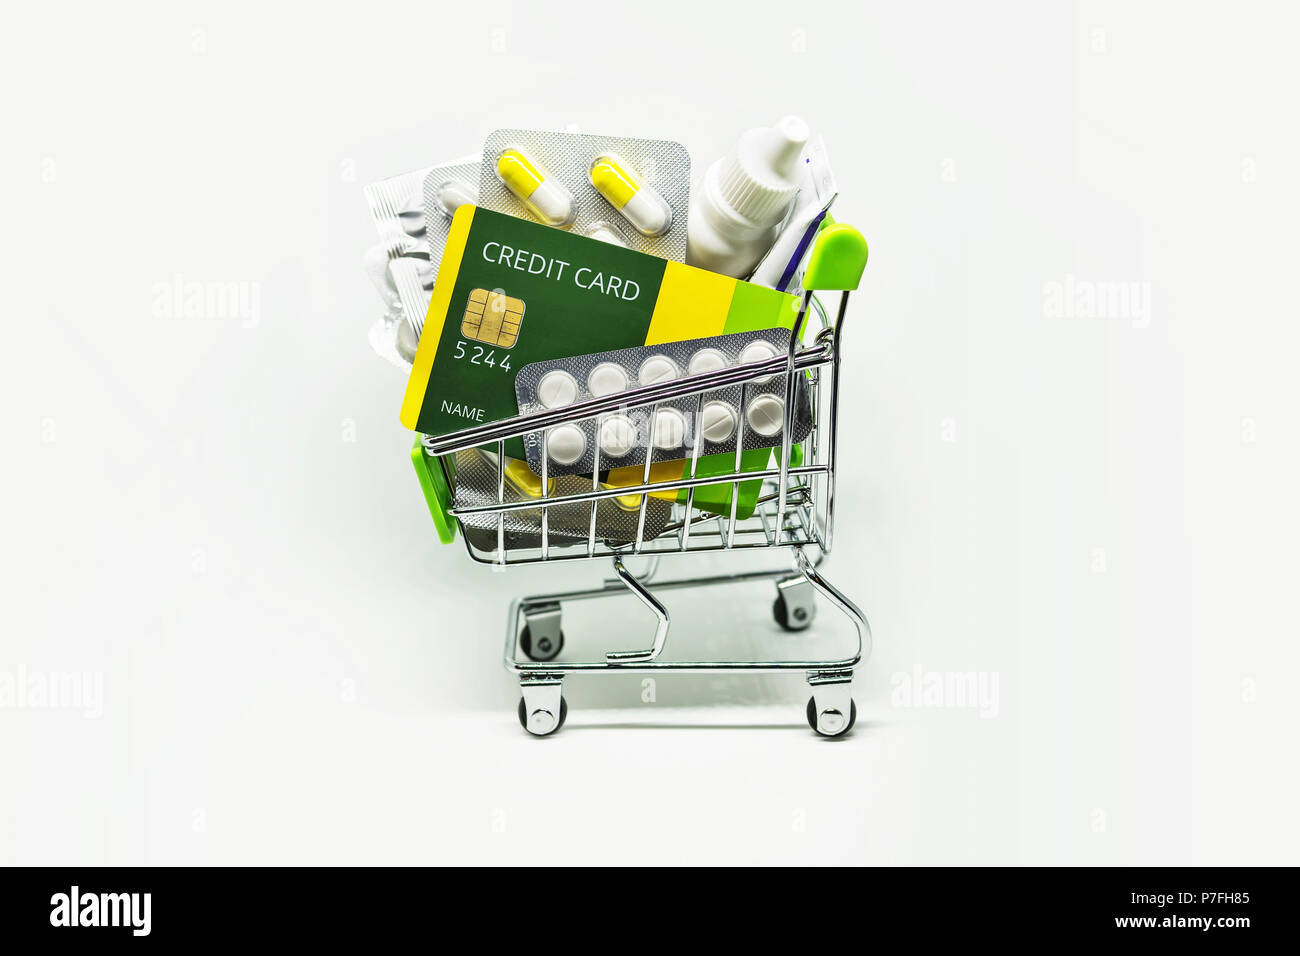 Many medicines and making purchases, Paying with a credit card. Basket of pills ointments and other medicines isolated on white background. increasing Stock Photo